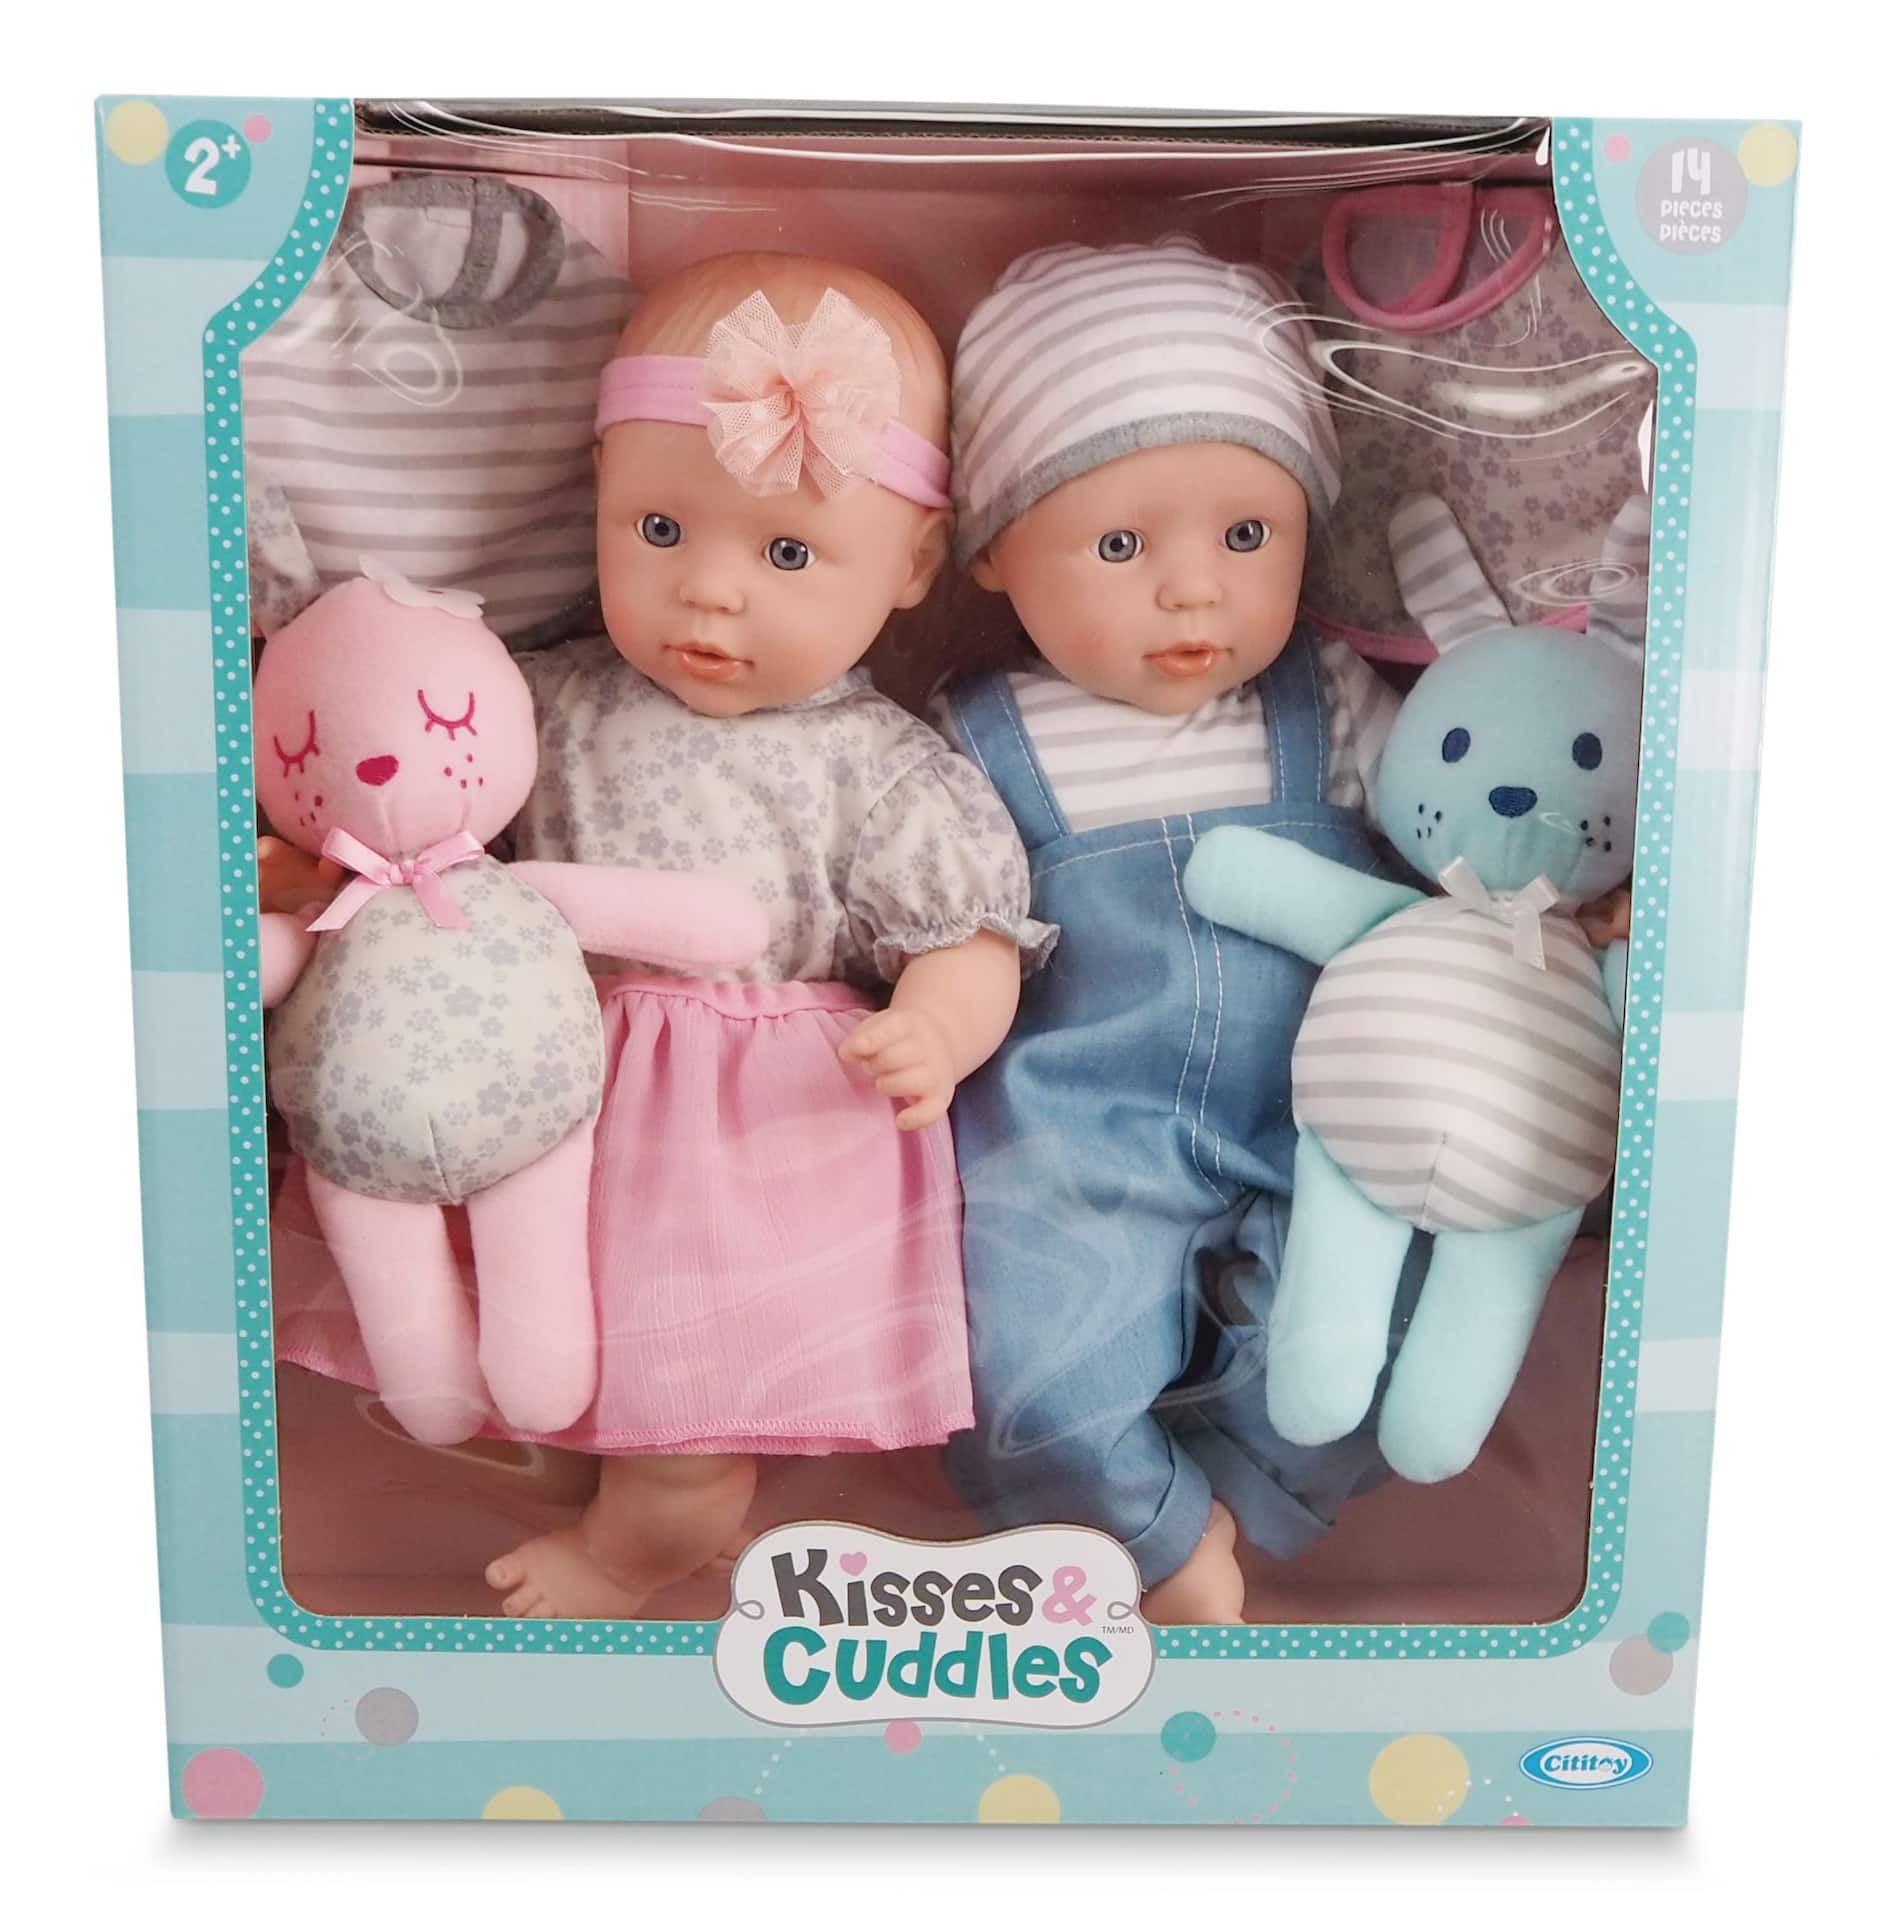 Kisses & Cuddles Soft Body Twin Baby Doll Toys w/Clothes & Accessories,  14-in, Ages 2+